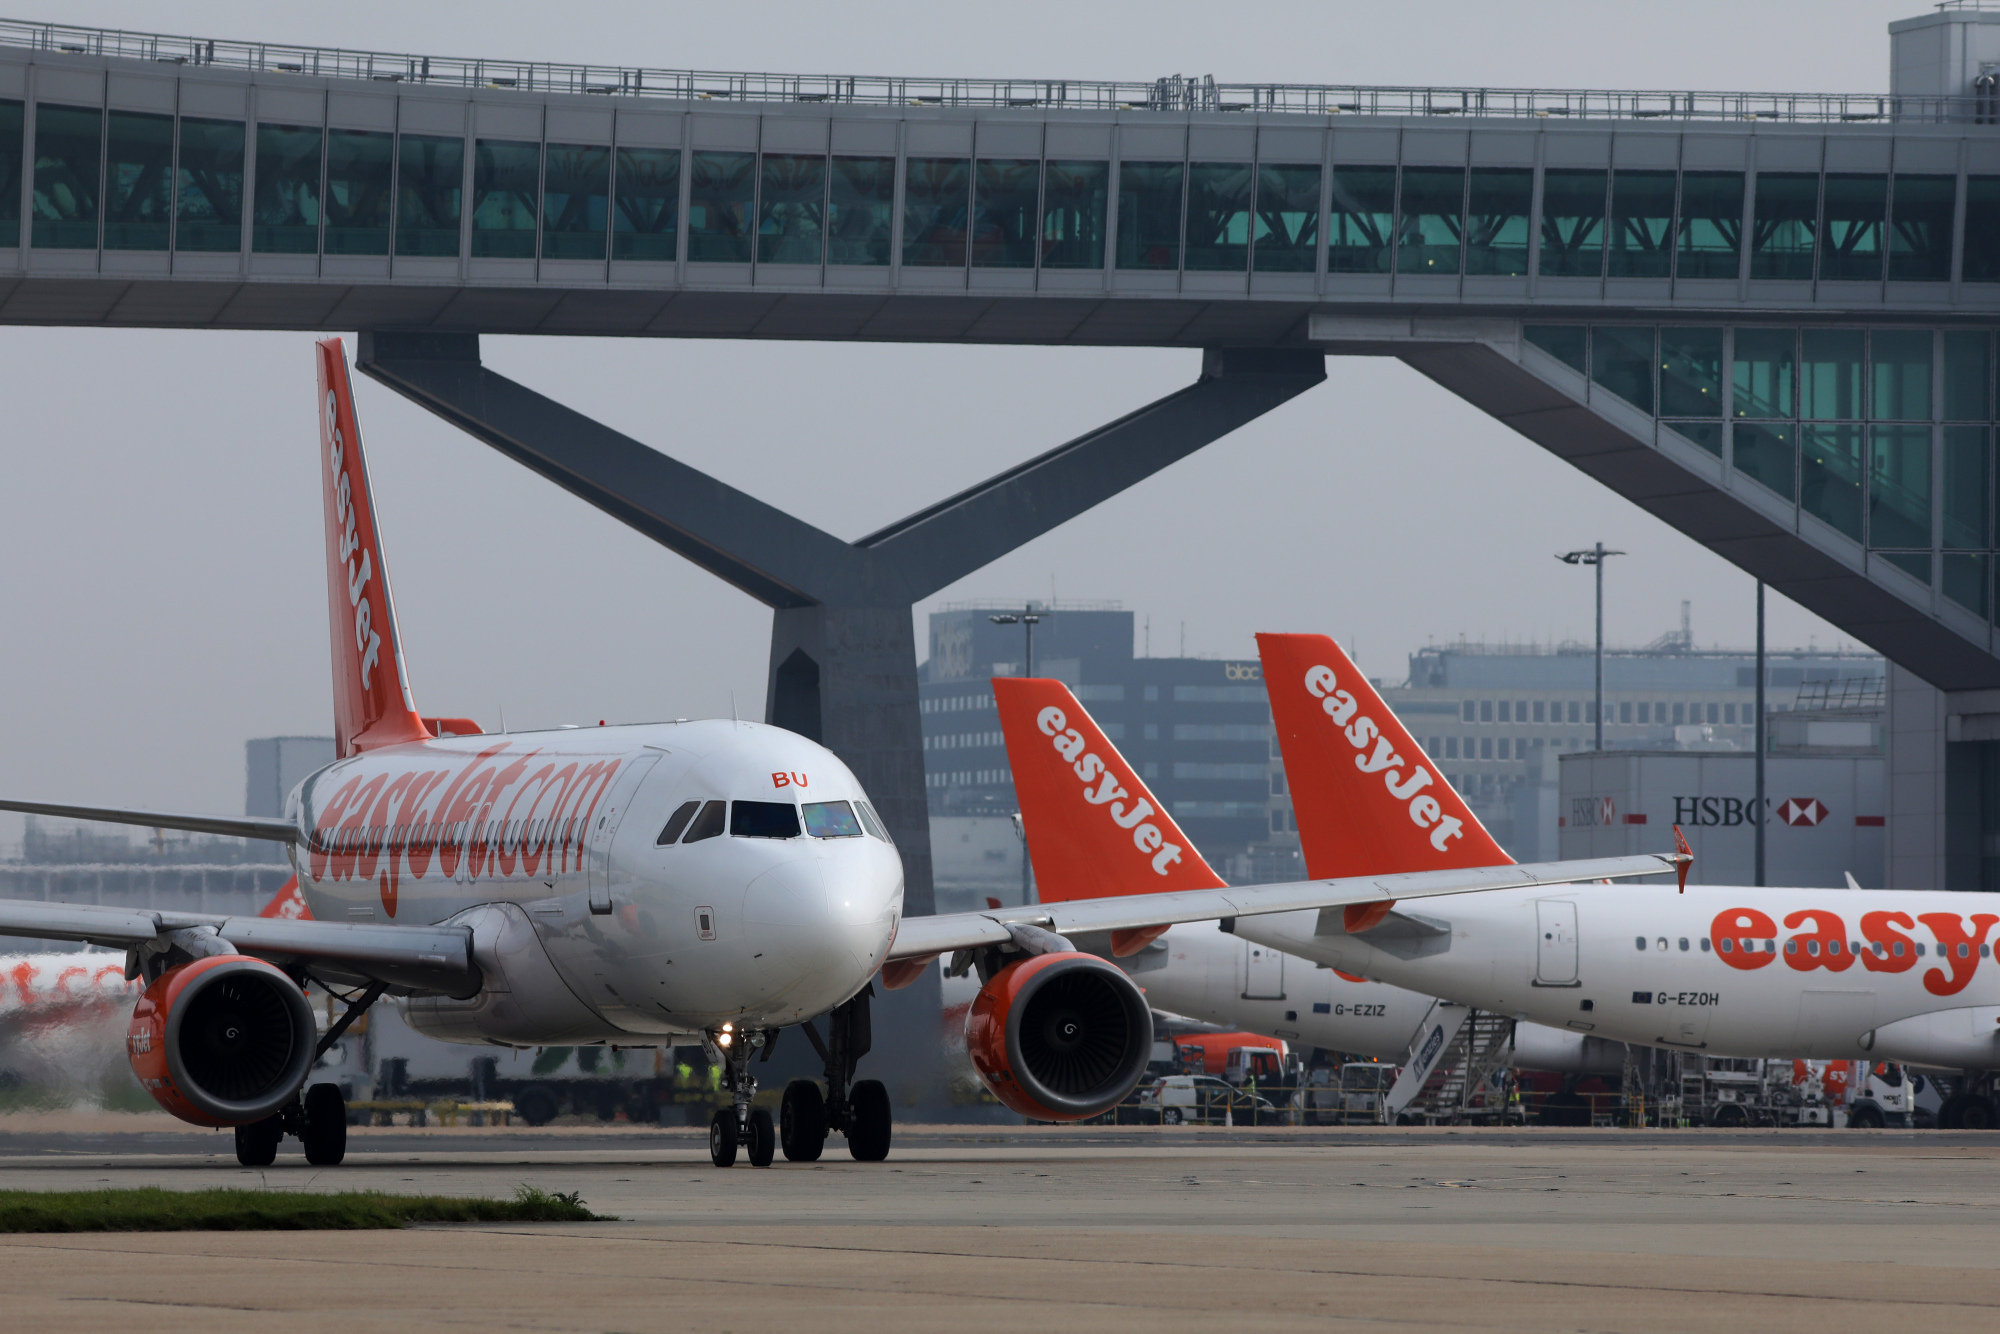 EasyJet Plc Presents Latest Technologies At An Innovation Day